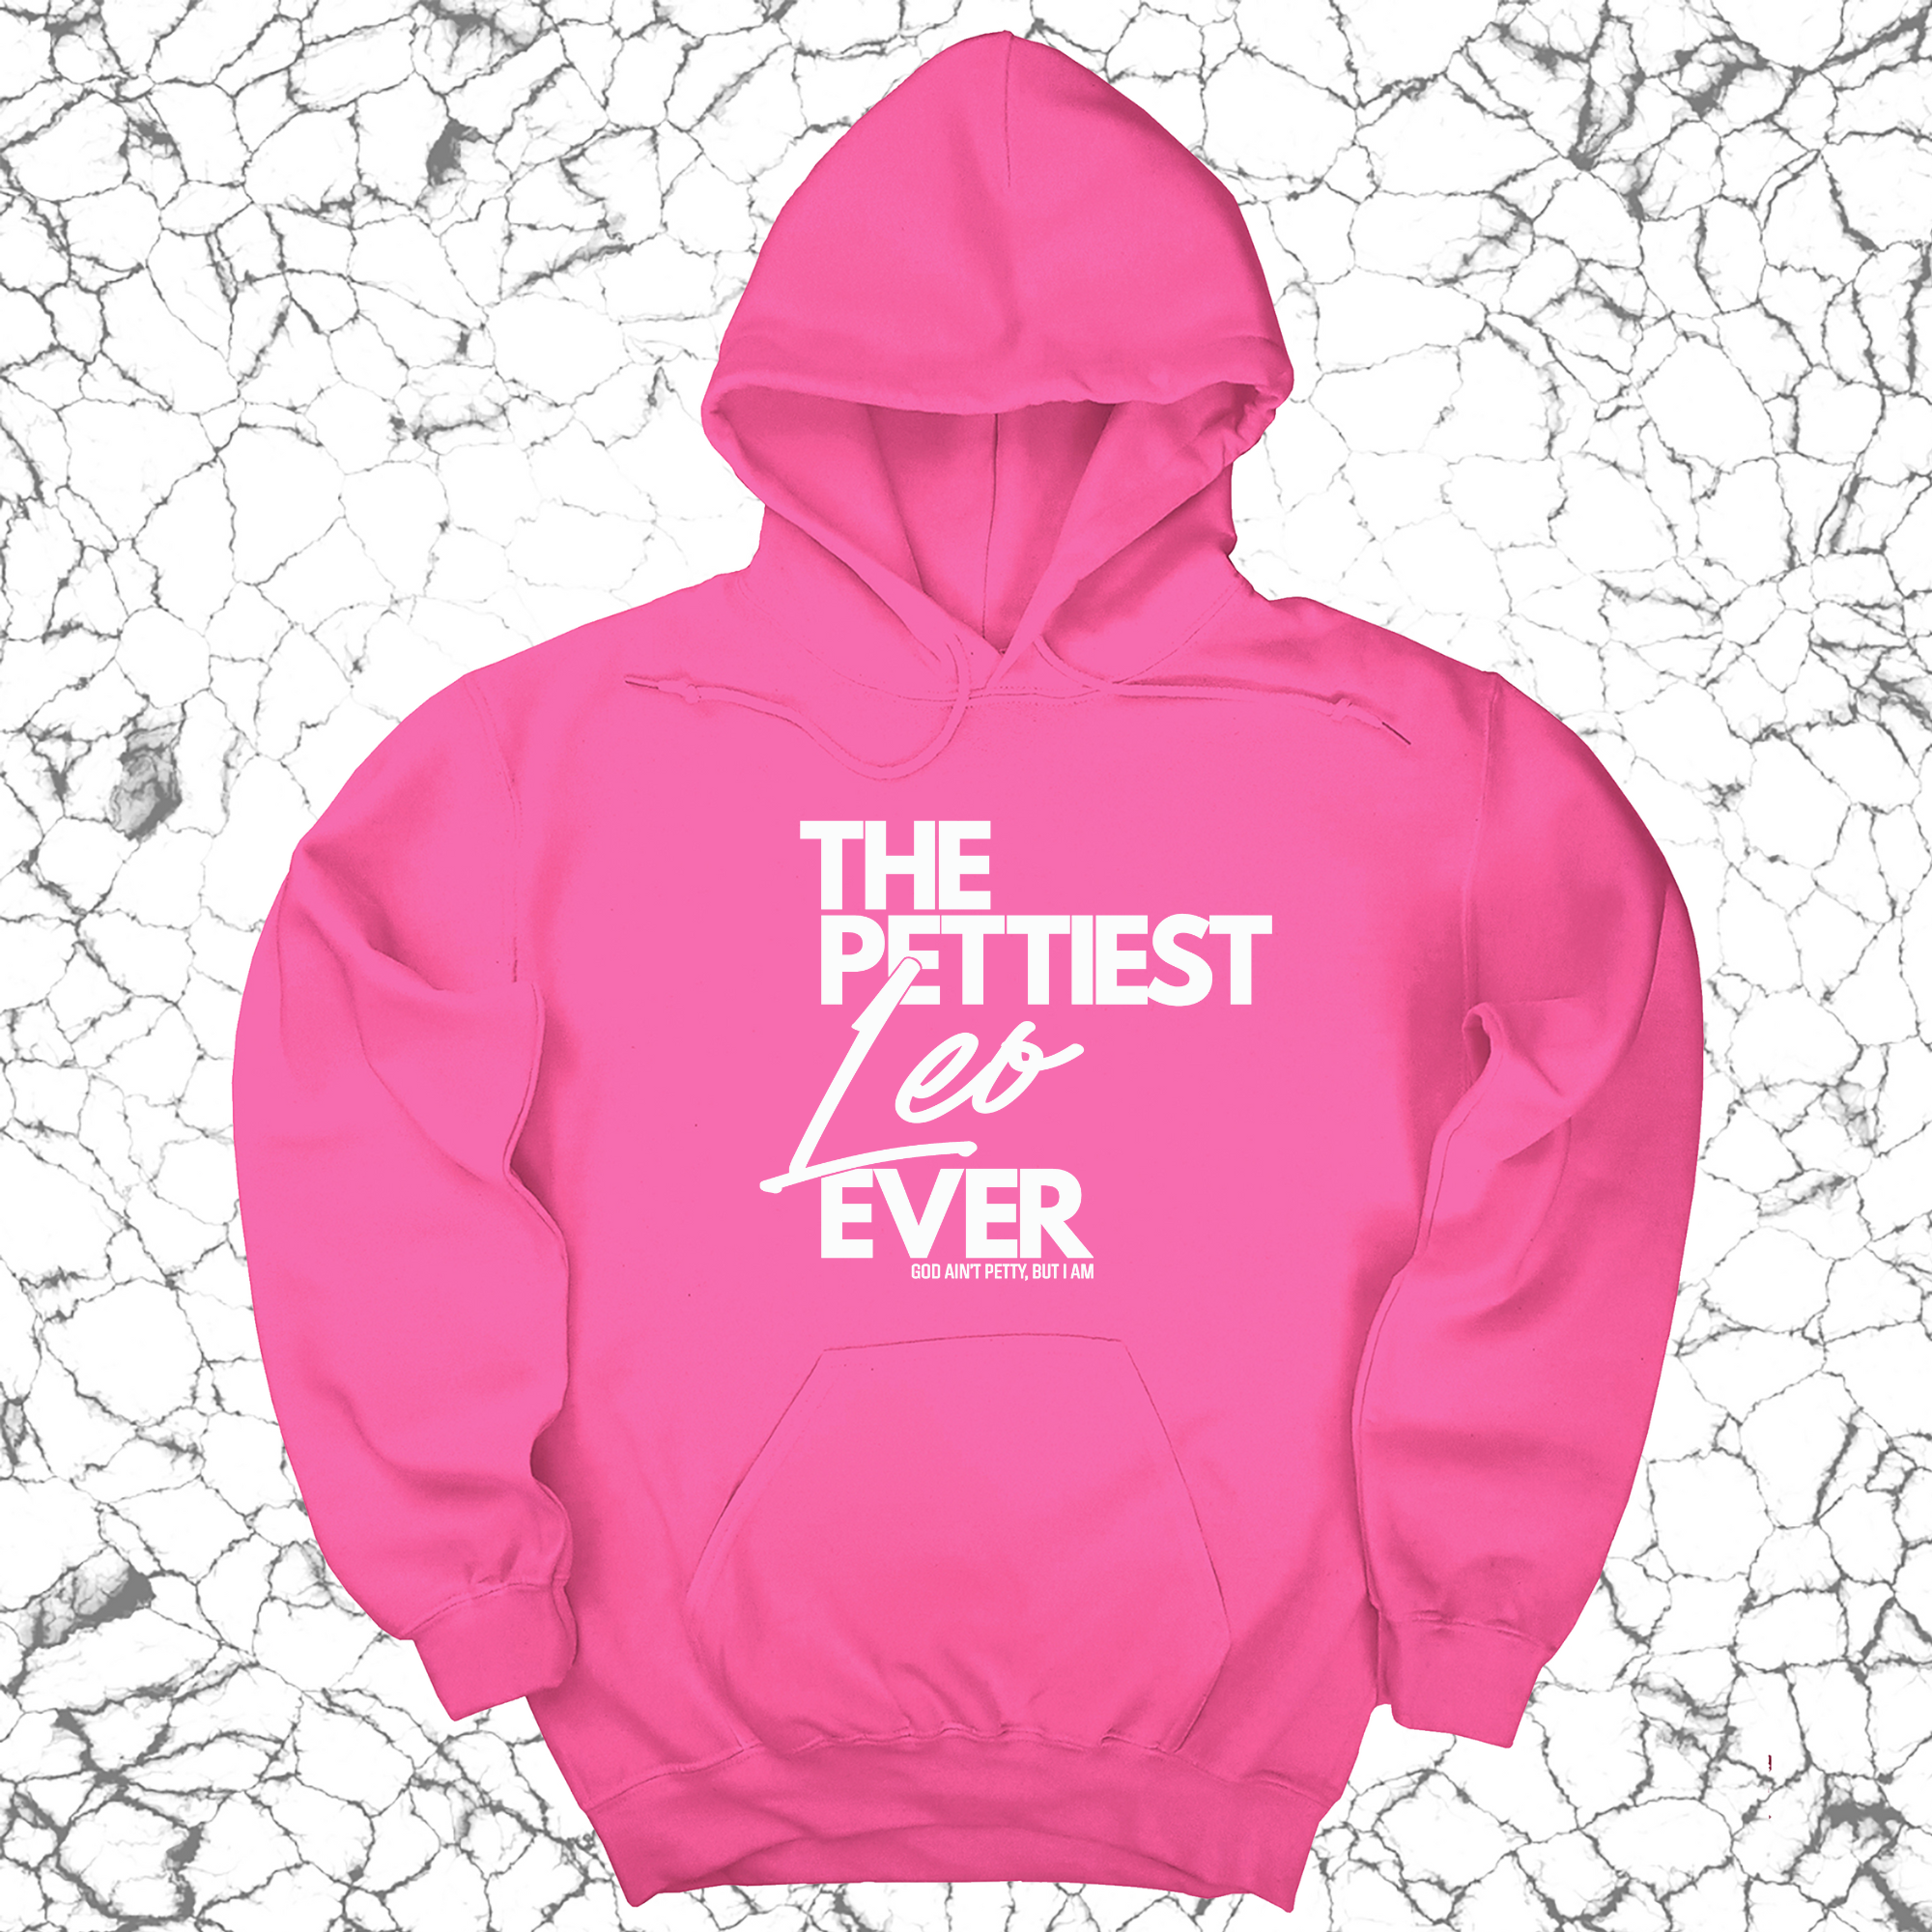 The Pettiest Leo Ever Unisex Hoodie-Hoodie-The Original God Ain't Petty But I Am